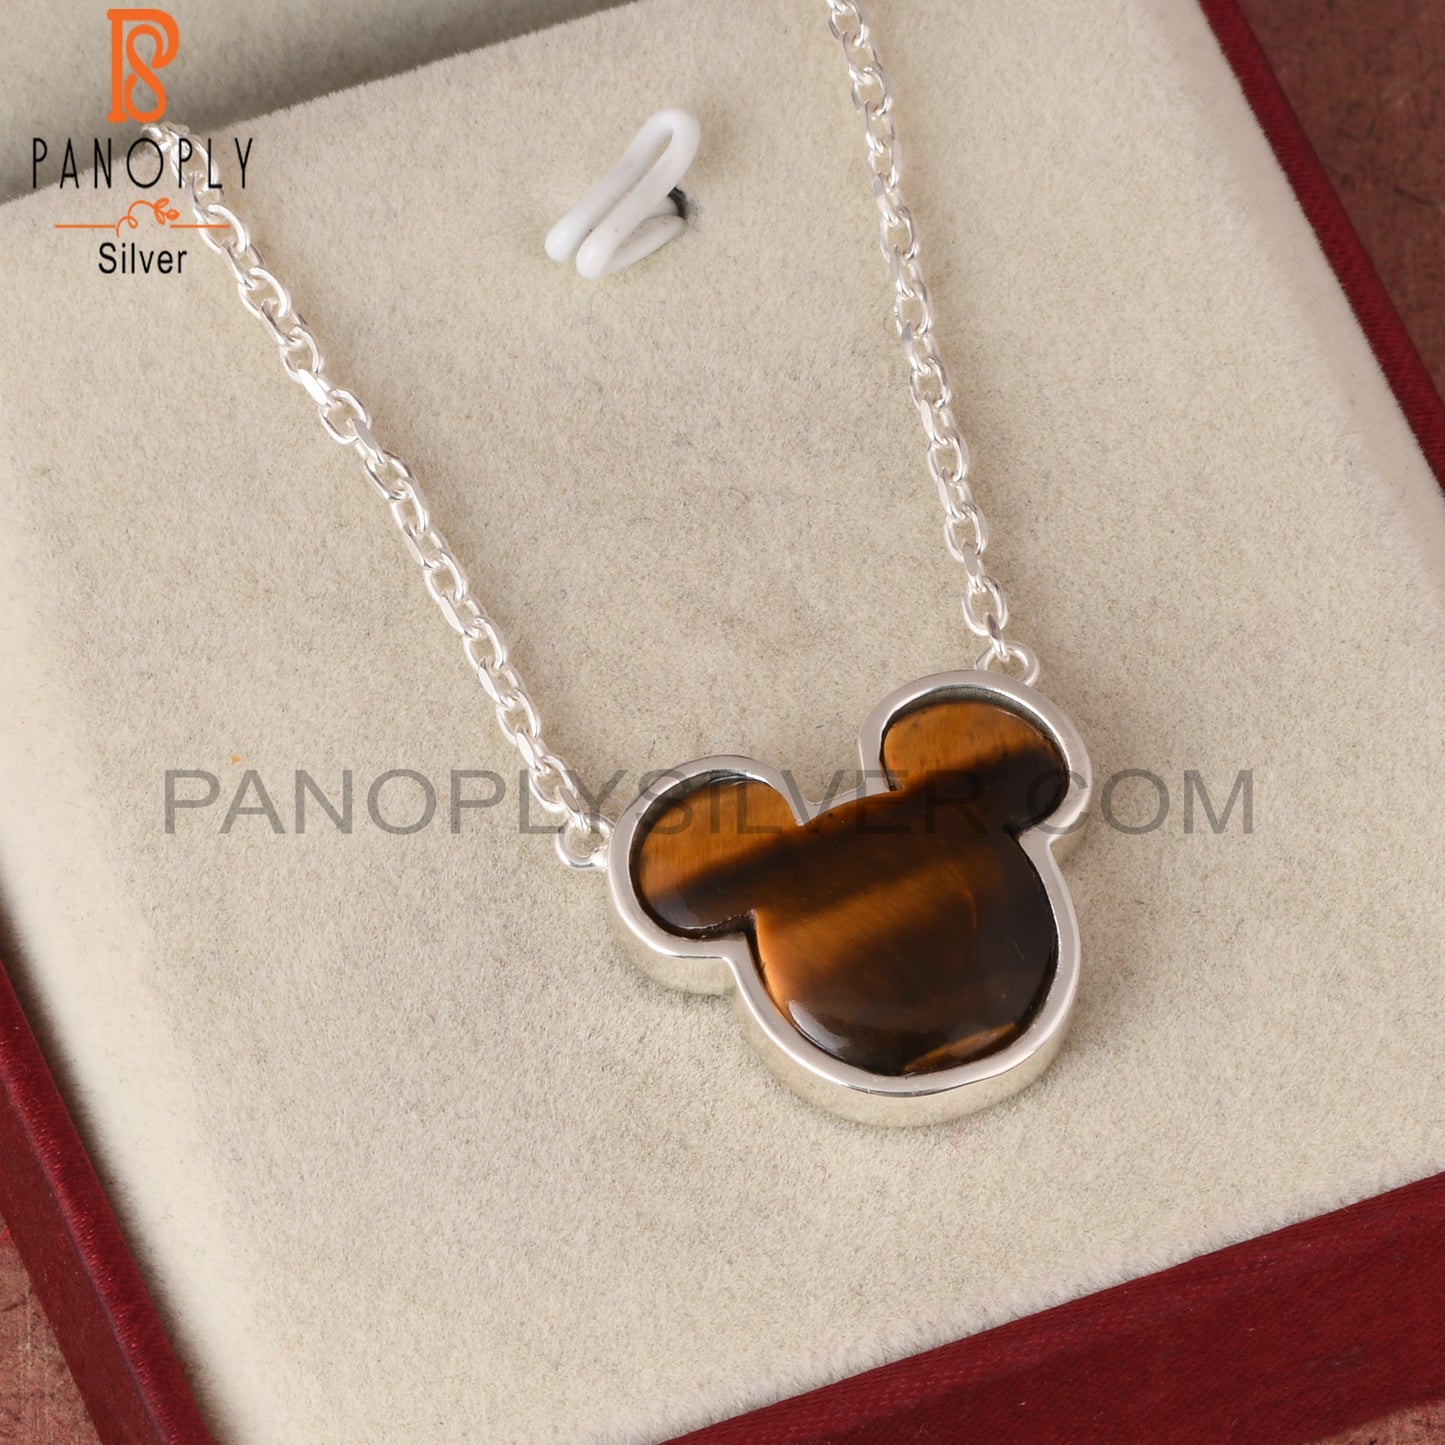 Tiger Eye Yellow Mickey Mouse 925 Sterling Silver Pendant